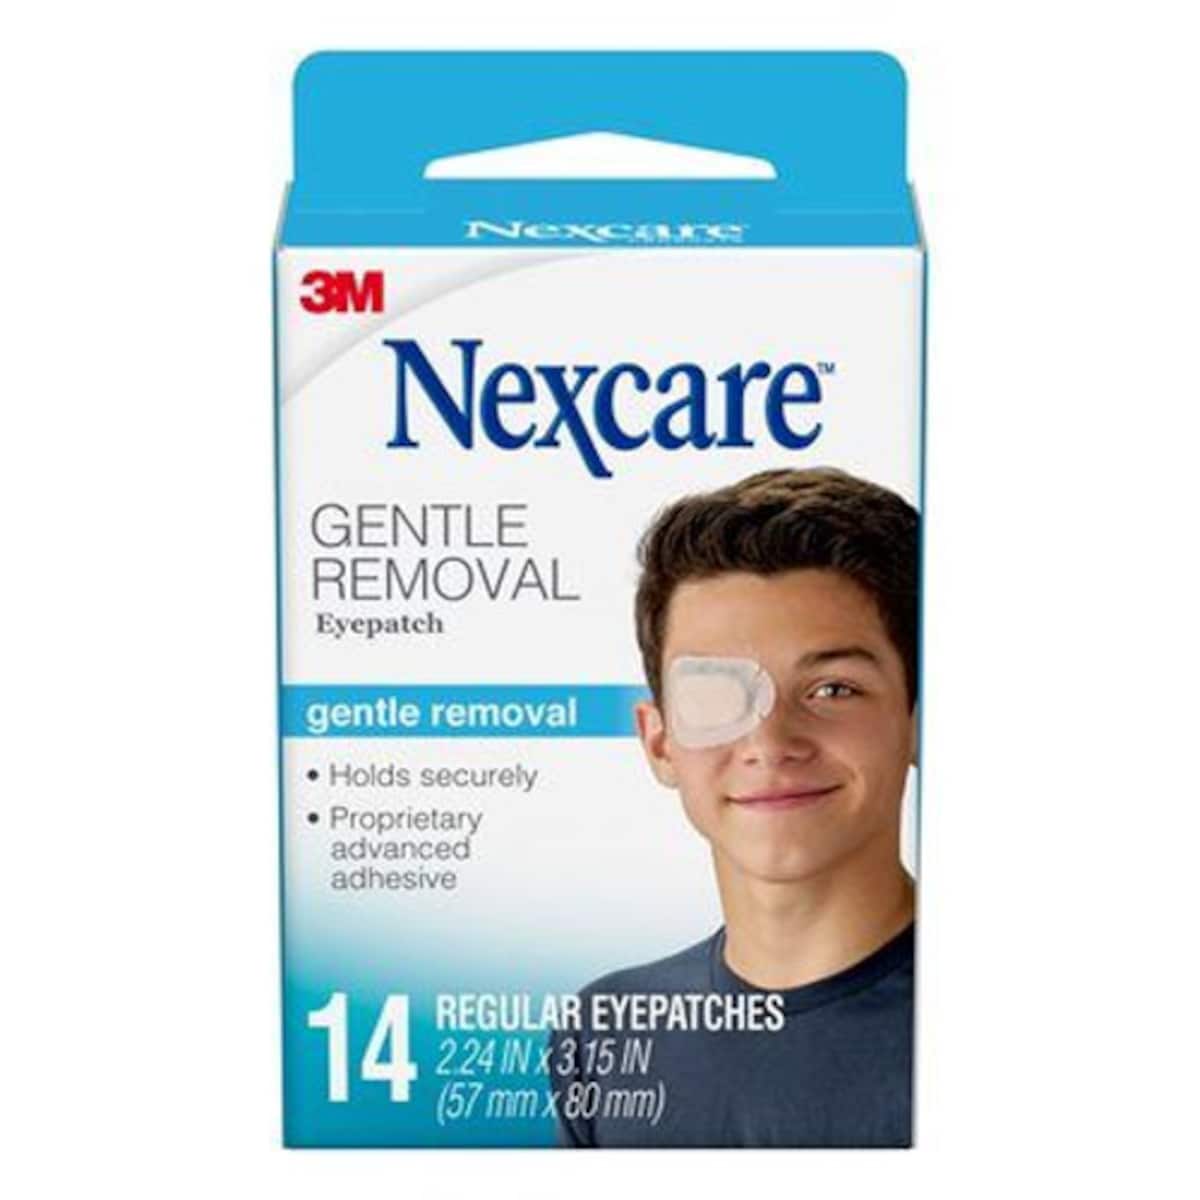 Nexcare Gentle Removal Eye Patch Regular 14 Patches